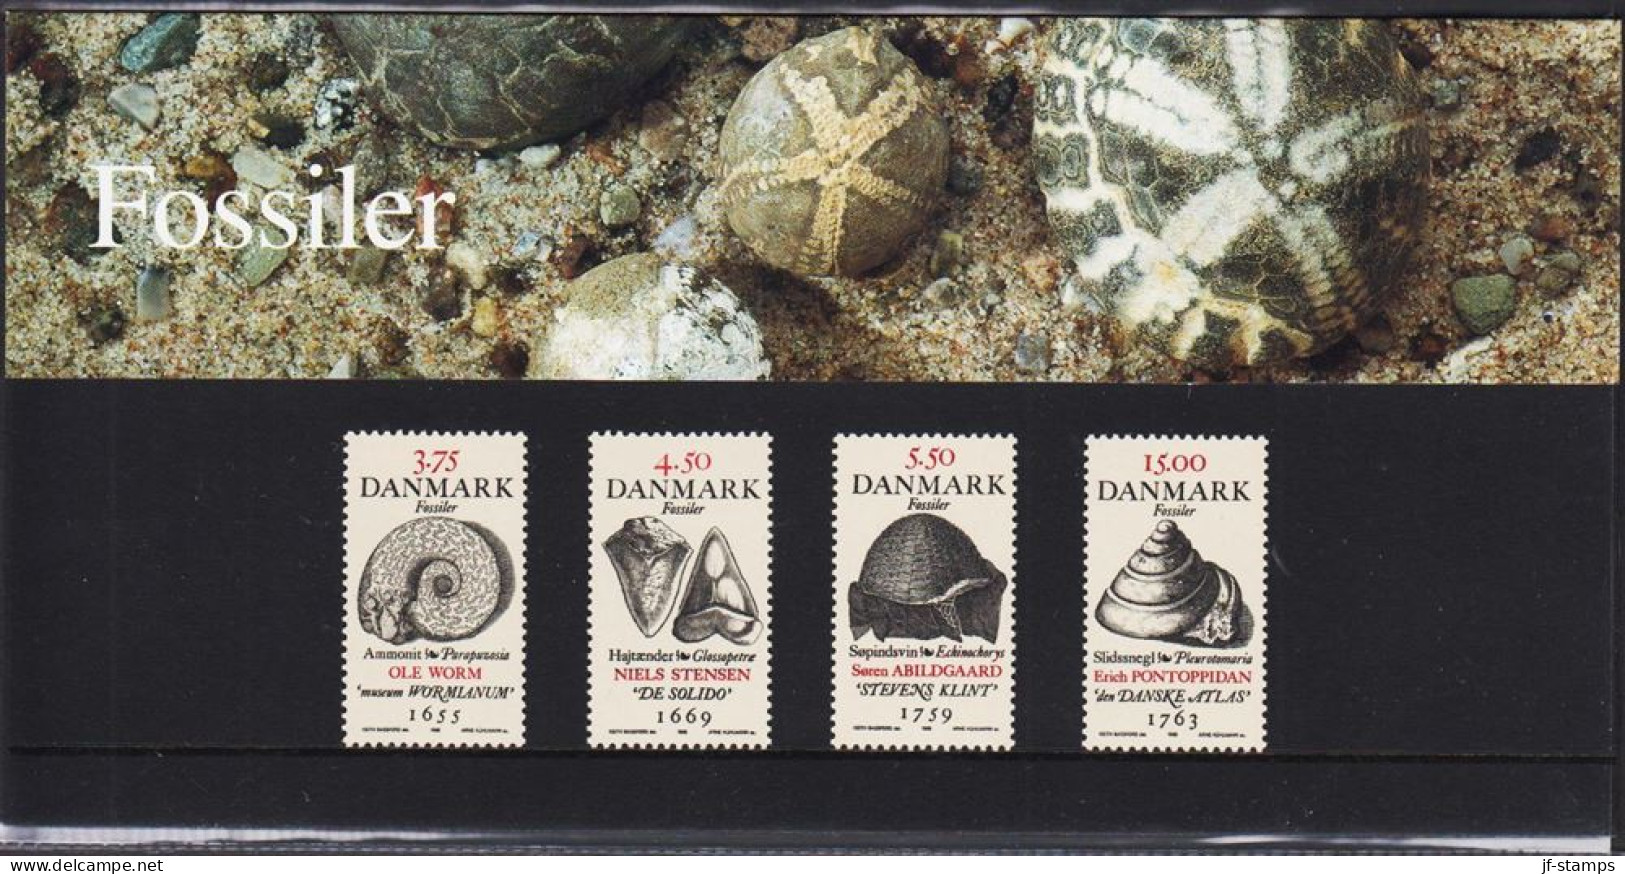 1998. DANMARK. Fossiler Complete Set In Official Folder (SM 32/1998) Never Hinged. (Michel 1195-1198) - JF544449 - Unused Stamps